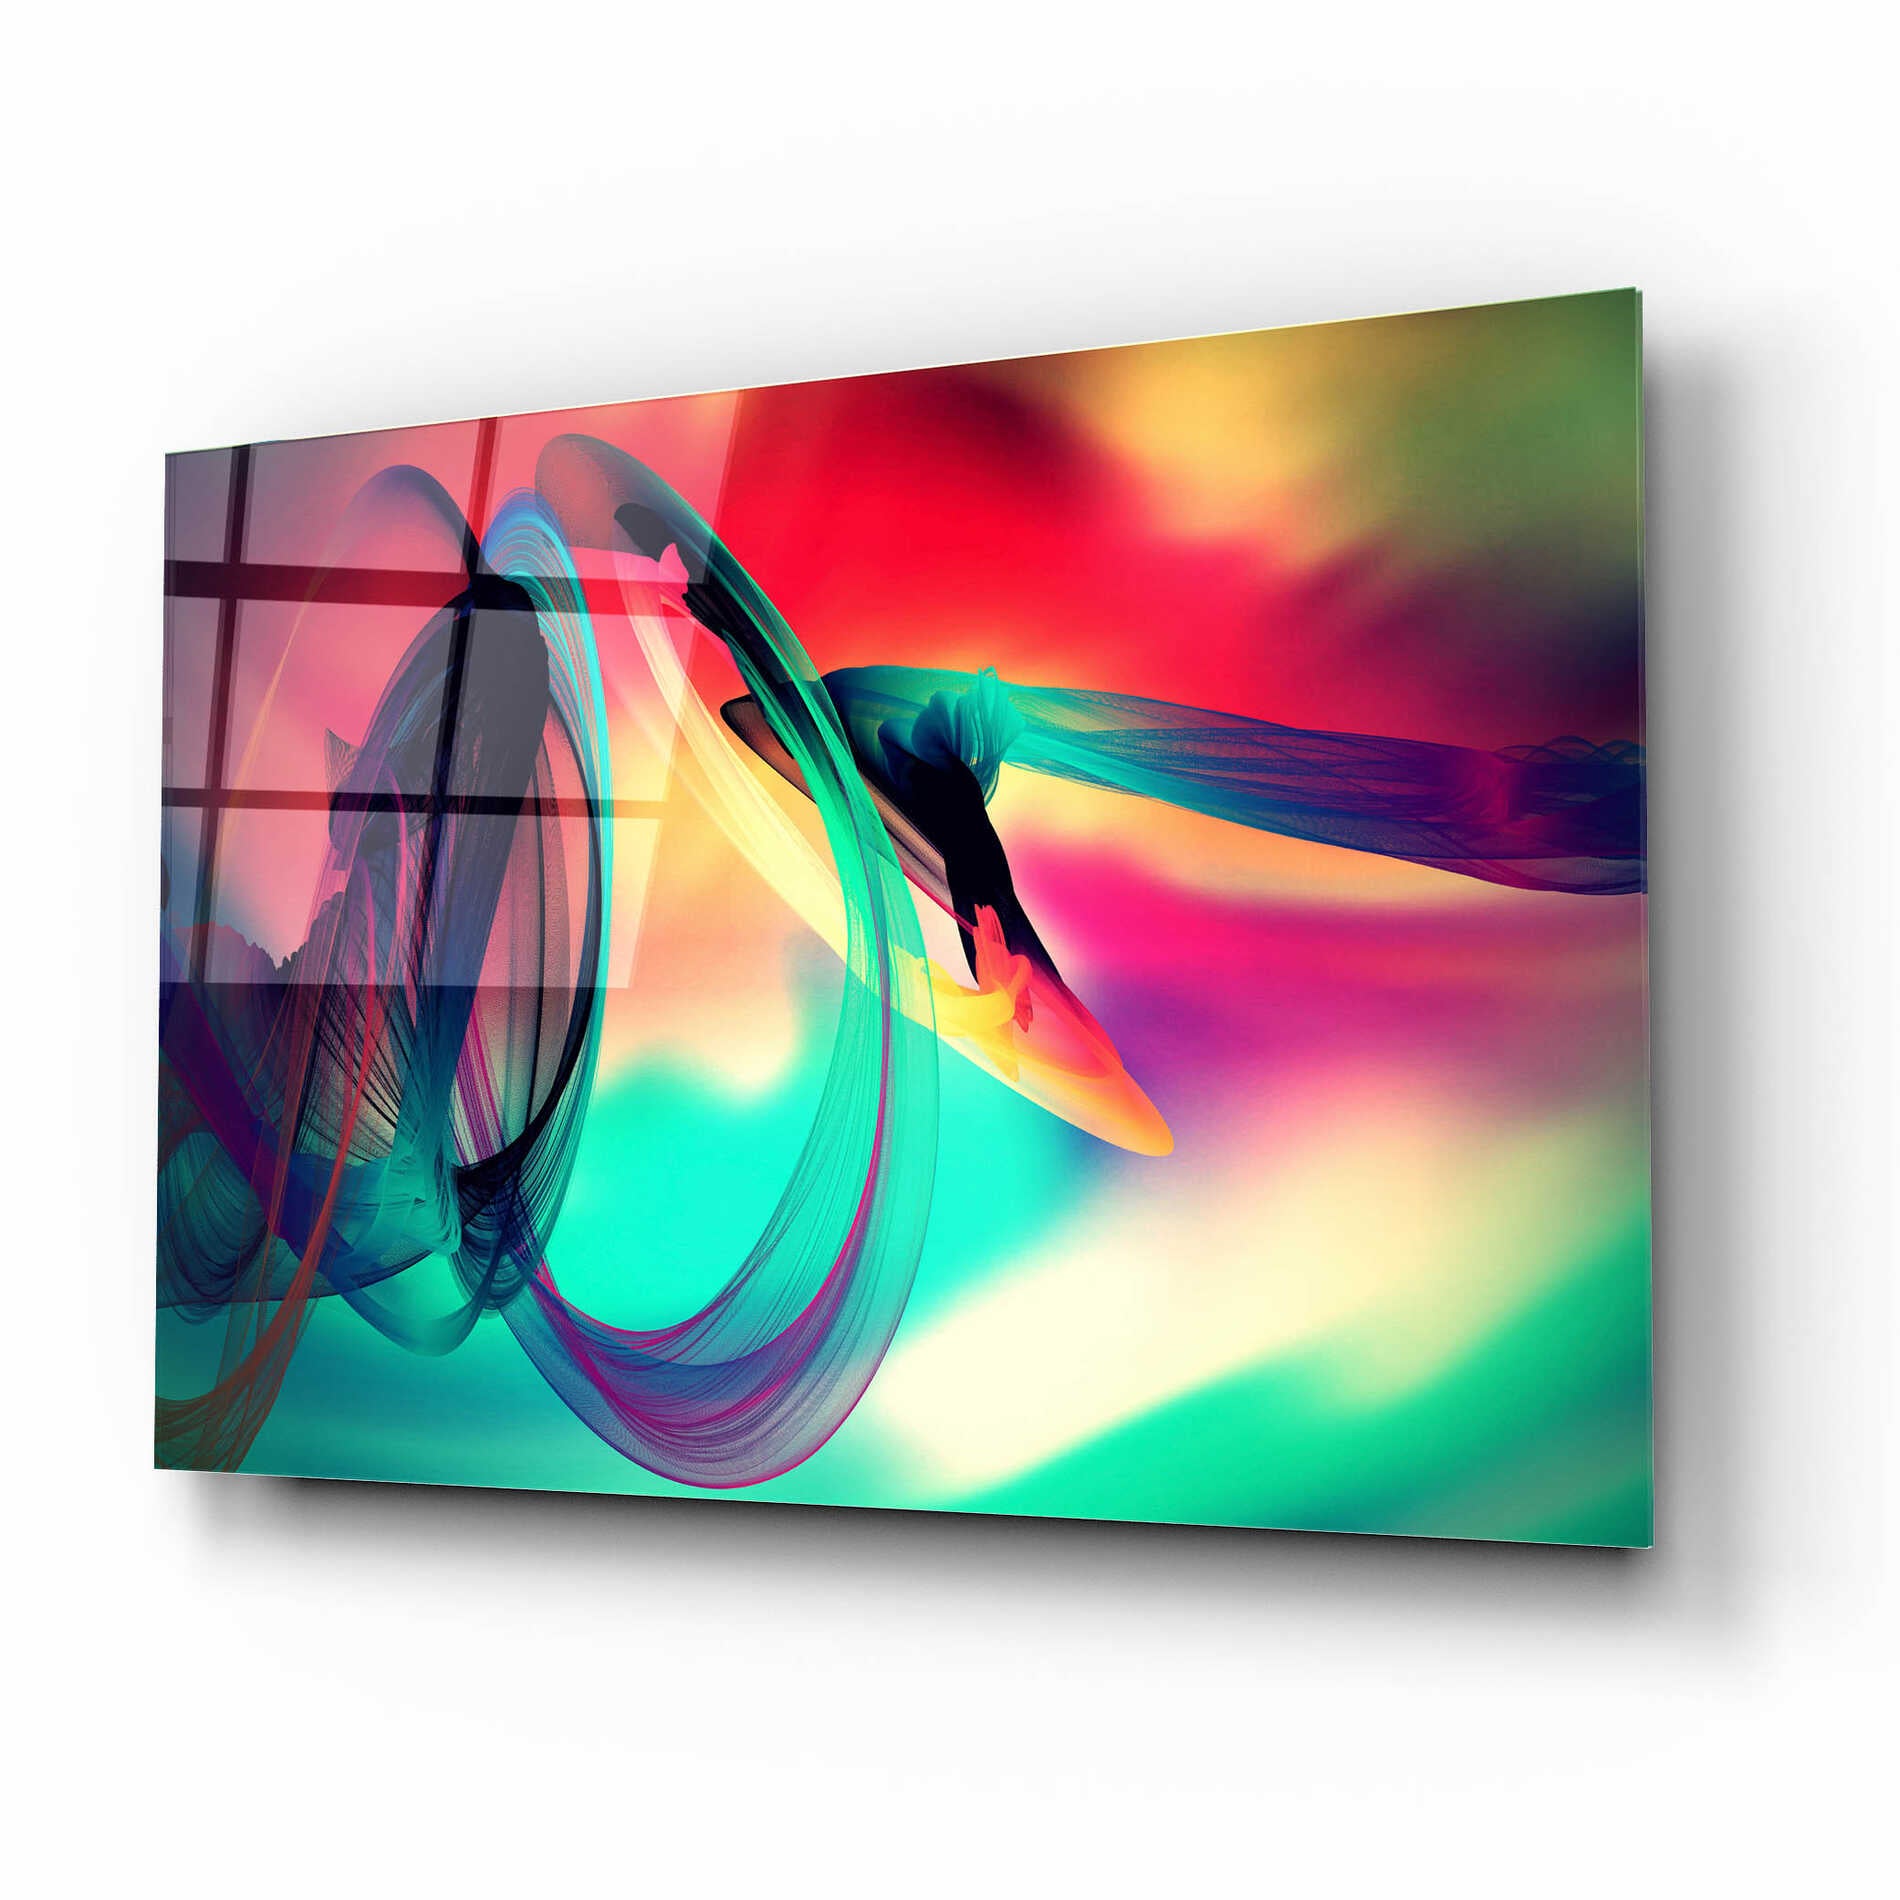 Epic Art 'Color In The Lines 27' by Irena Orlov, Acrylic Glass Wall Art,16x12